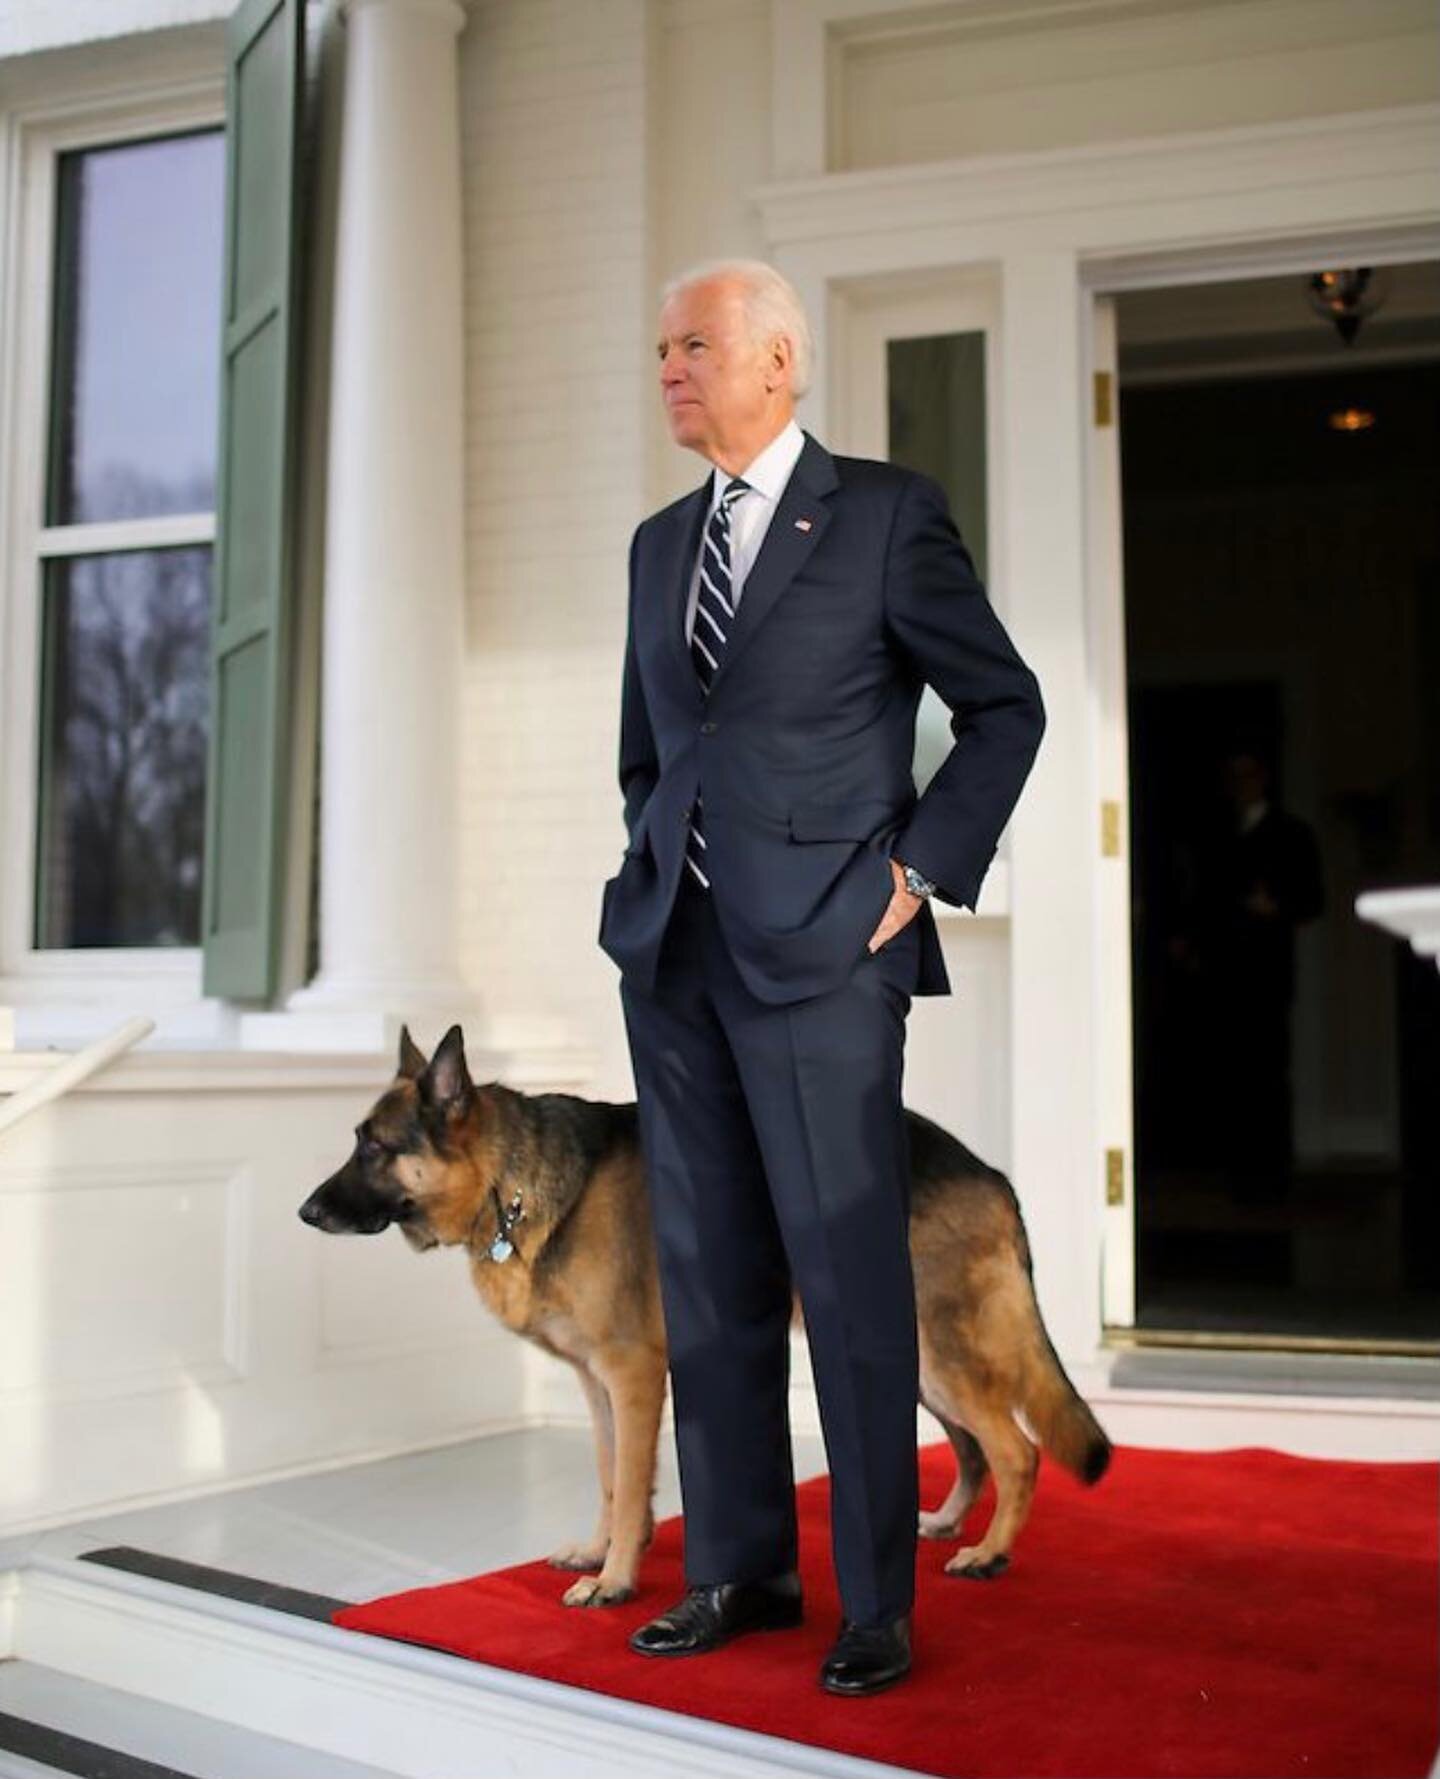 It&rsquo;s time to get a dog back in the White House. 🐶 Congratulations to President Elect @joebiden and @drbiden 🇺🇸 Let us know when you&rsquo;re ready to select your presidential dog beds for Champ and Major 🙌🏻